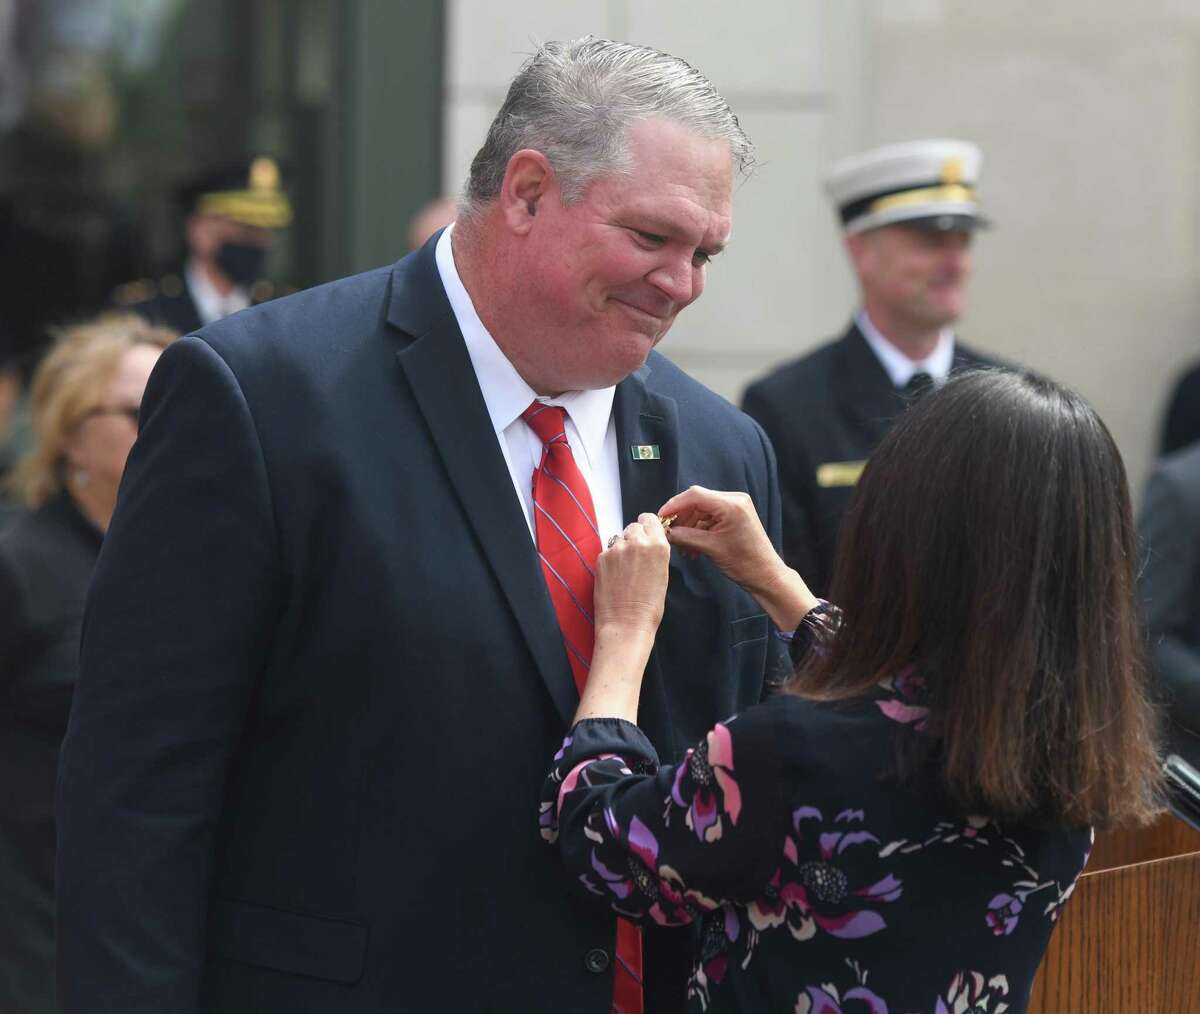 Incoming Fire Chief Joseph McHugh receives his pin during his swearing-in ceremony at the Public Safety Complex in Greenwich, Conn. Monday, Aug. 31, 2020. McHugh grew up in Greenwich and spent most of his career with the FDNY. The incoming Fire Chief will succeed Peter Siecienski, who retired in May, and begin his role on Sept. 14.